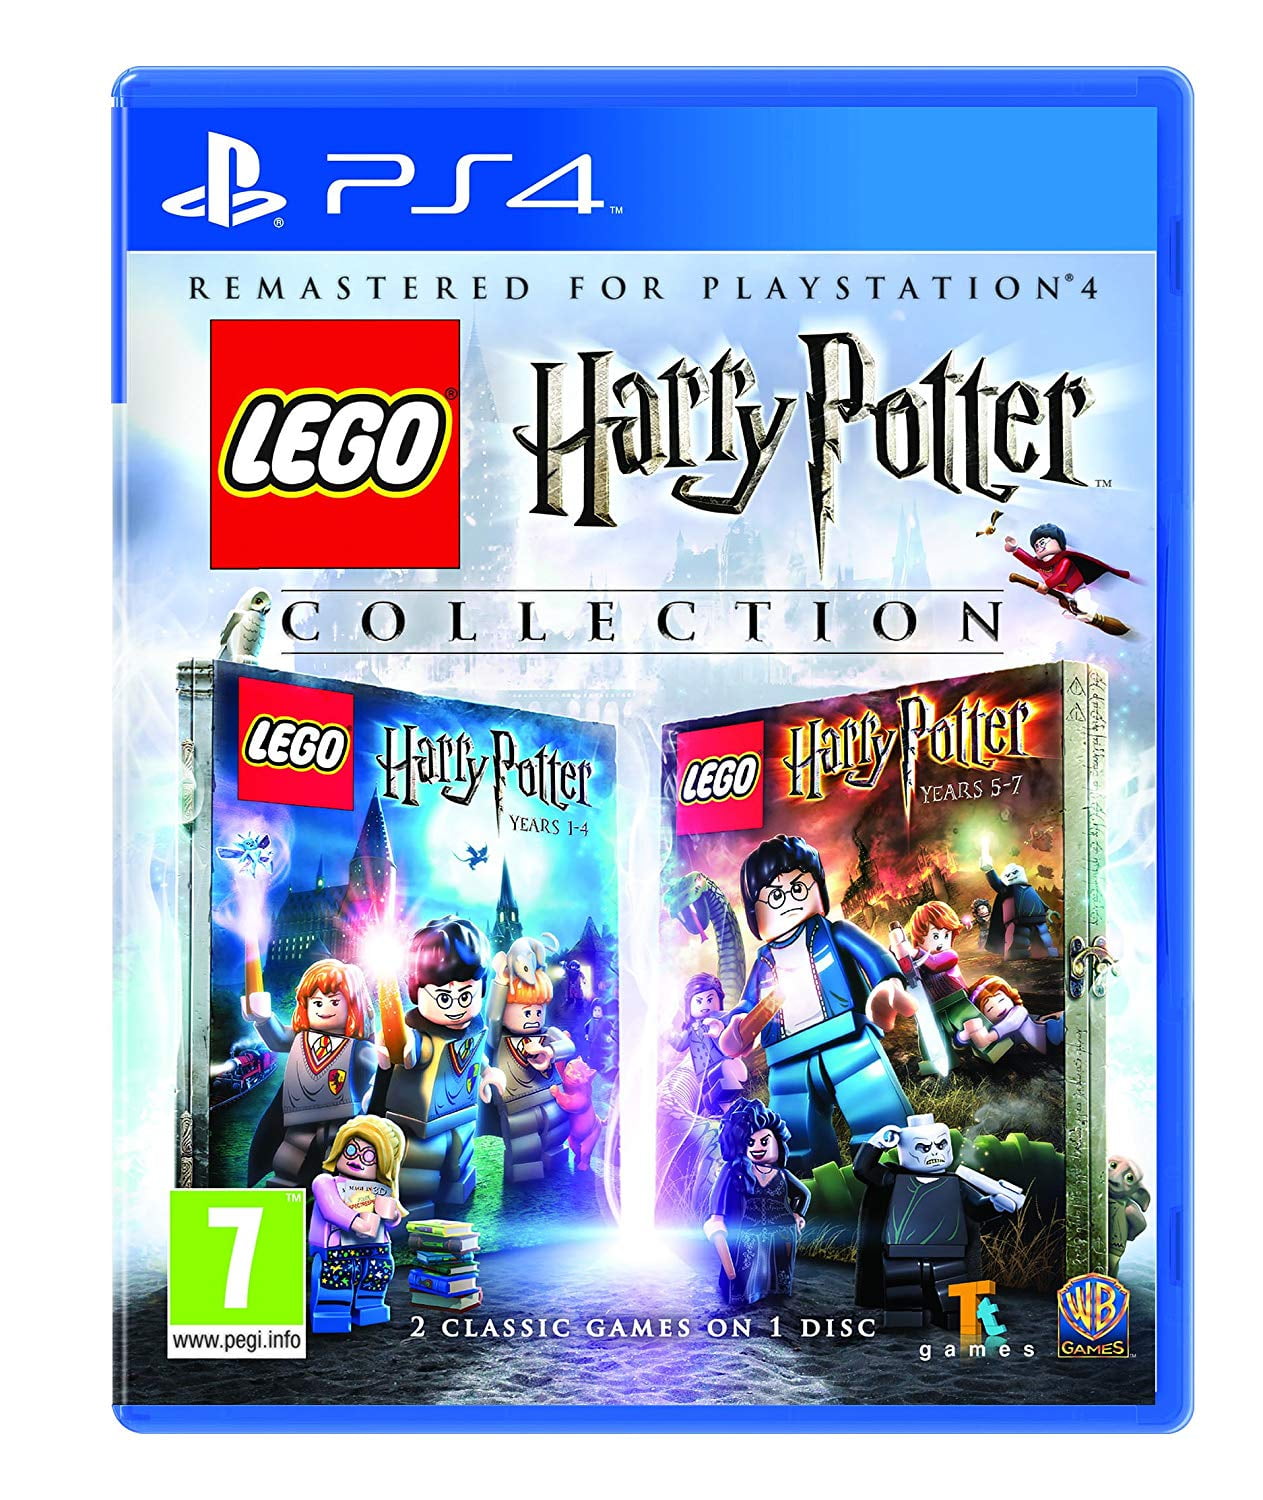 lego-harry-potter-collection-ps4-playstation-4-years-1-4-and-years-5